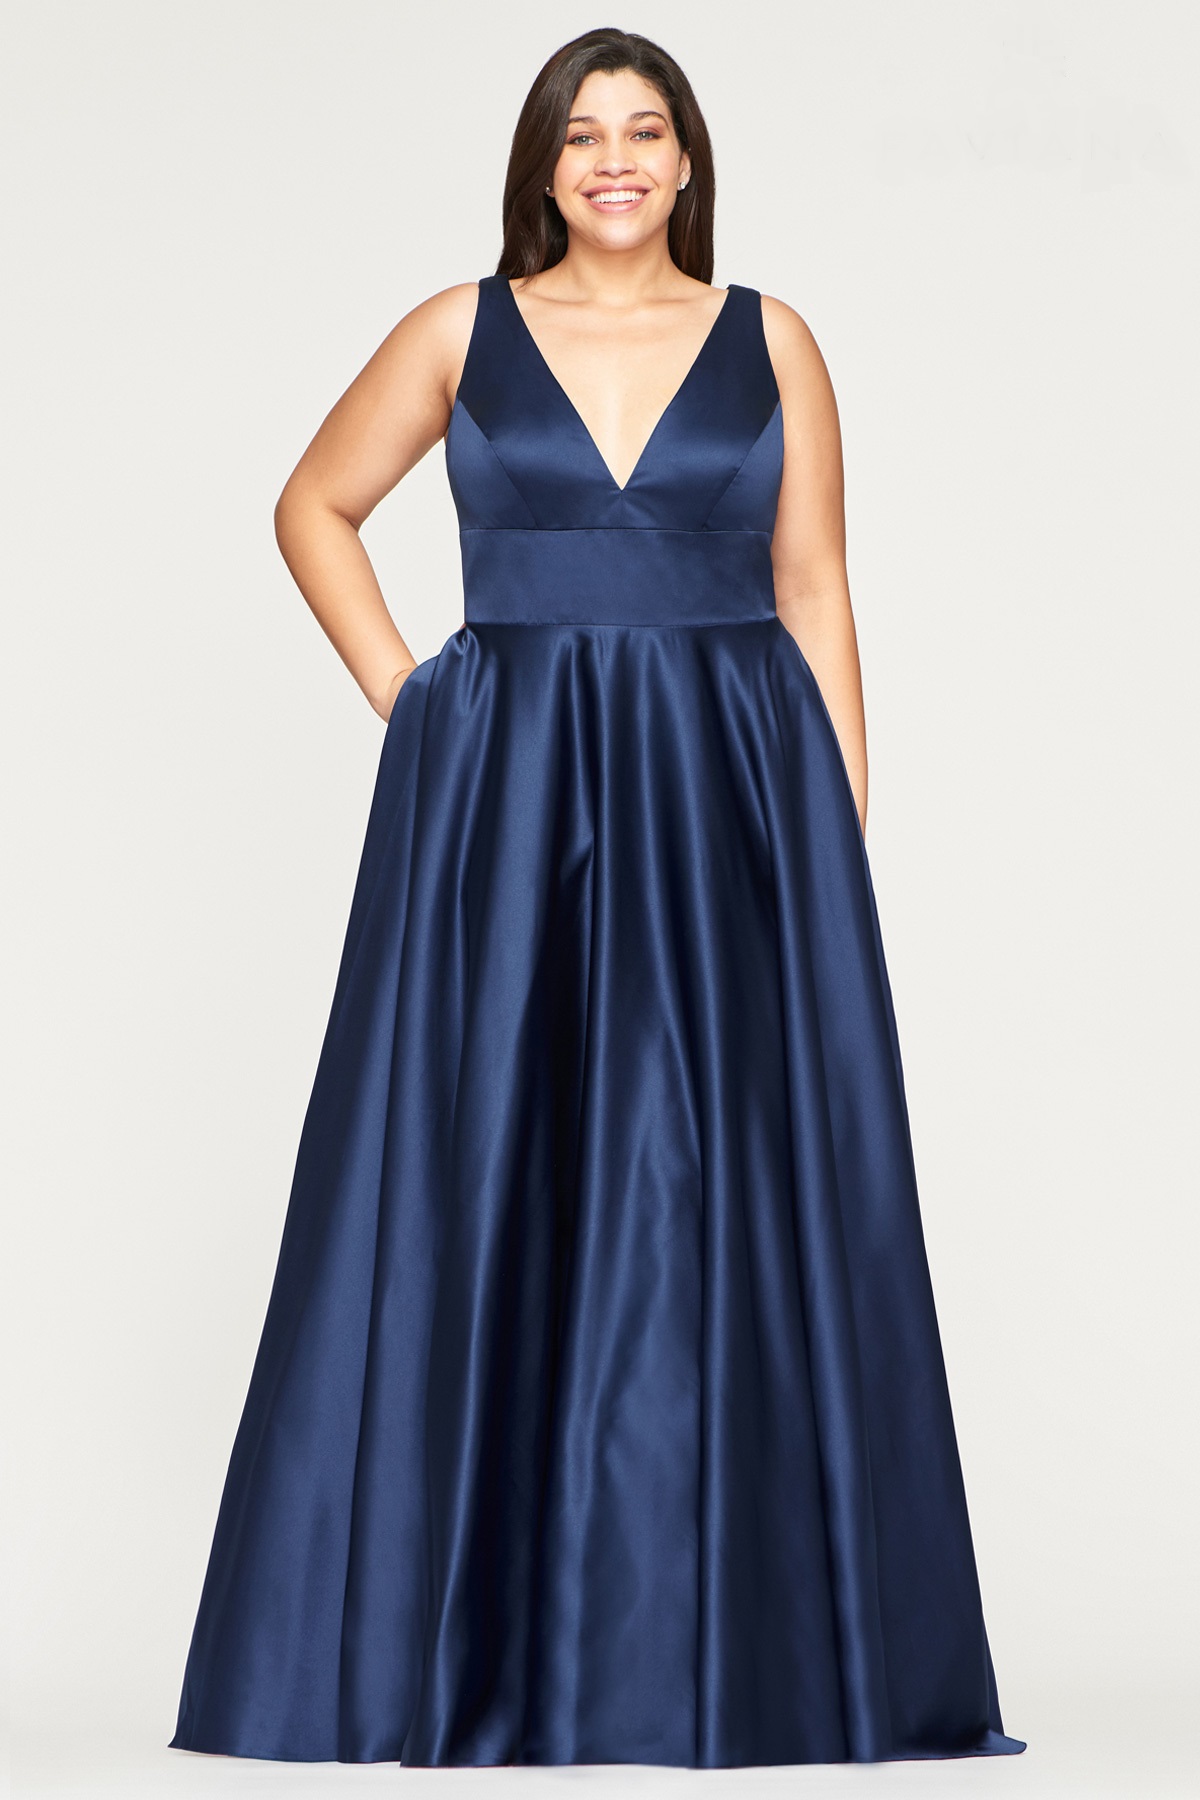 Plus size satin prom dress/ball gown at Ball Gown Heaven